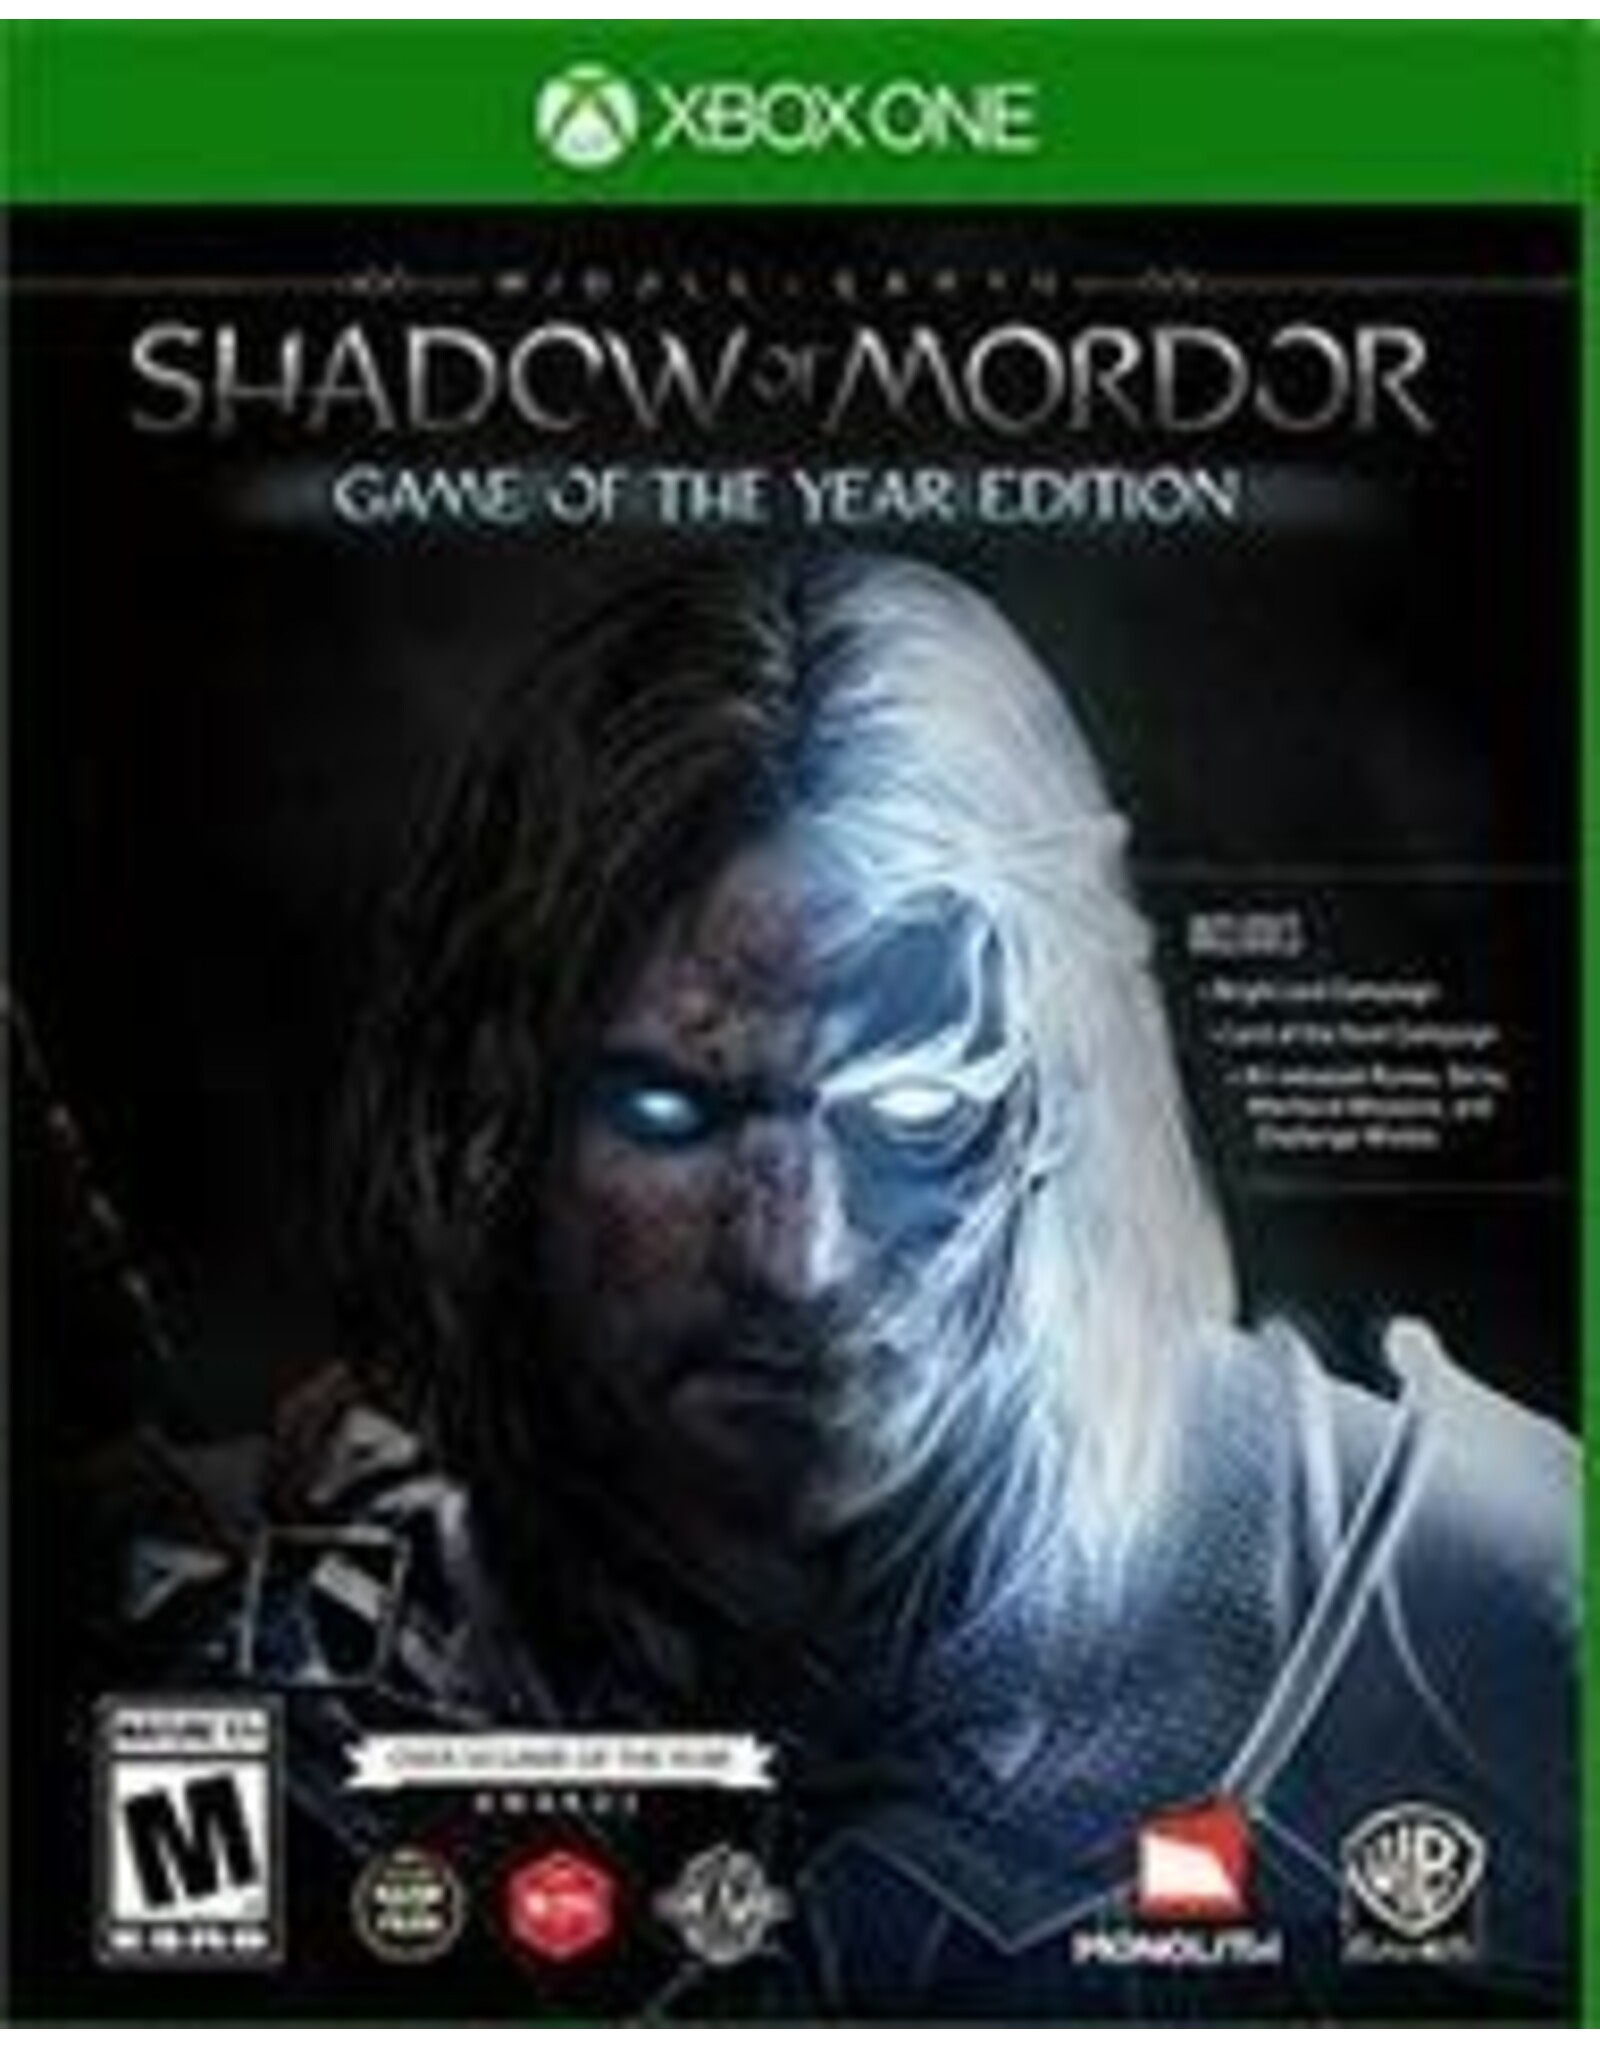 Xbox One Middle Earth: Shadow of Mordor - Game of Year Edition (Used)